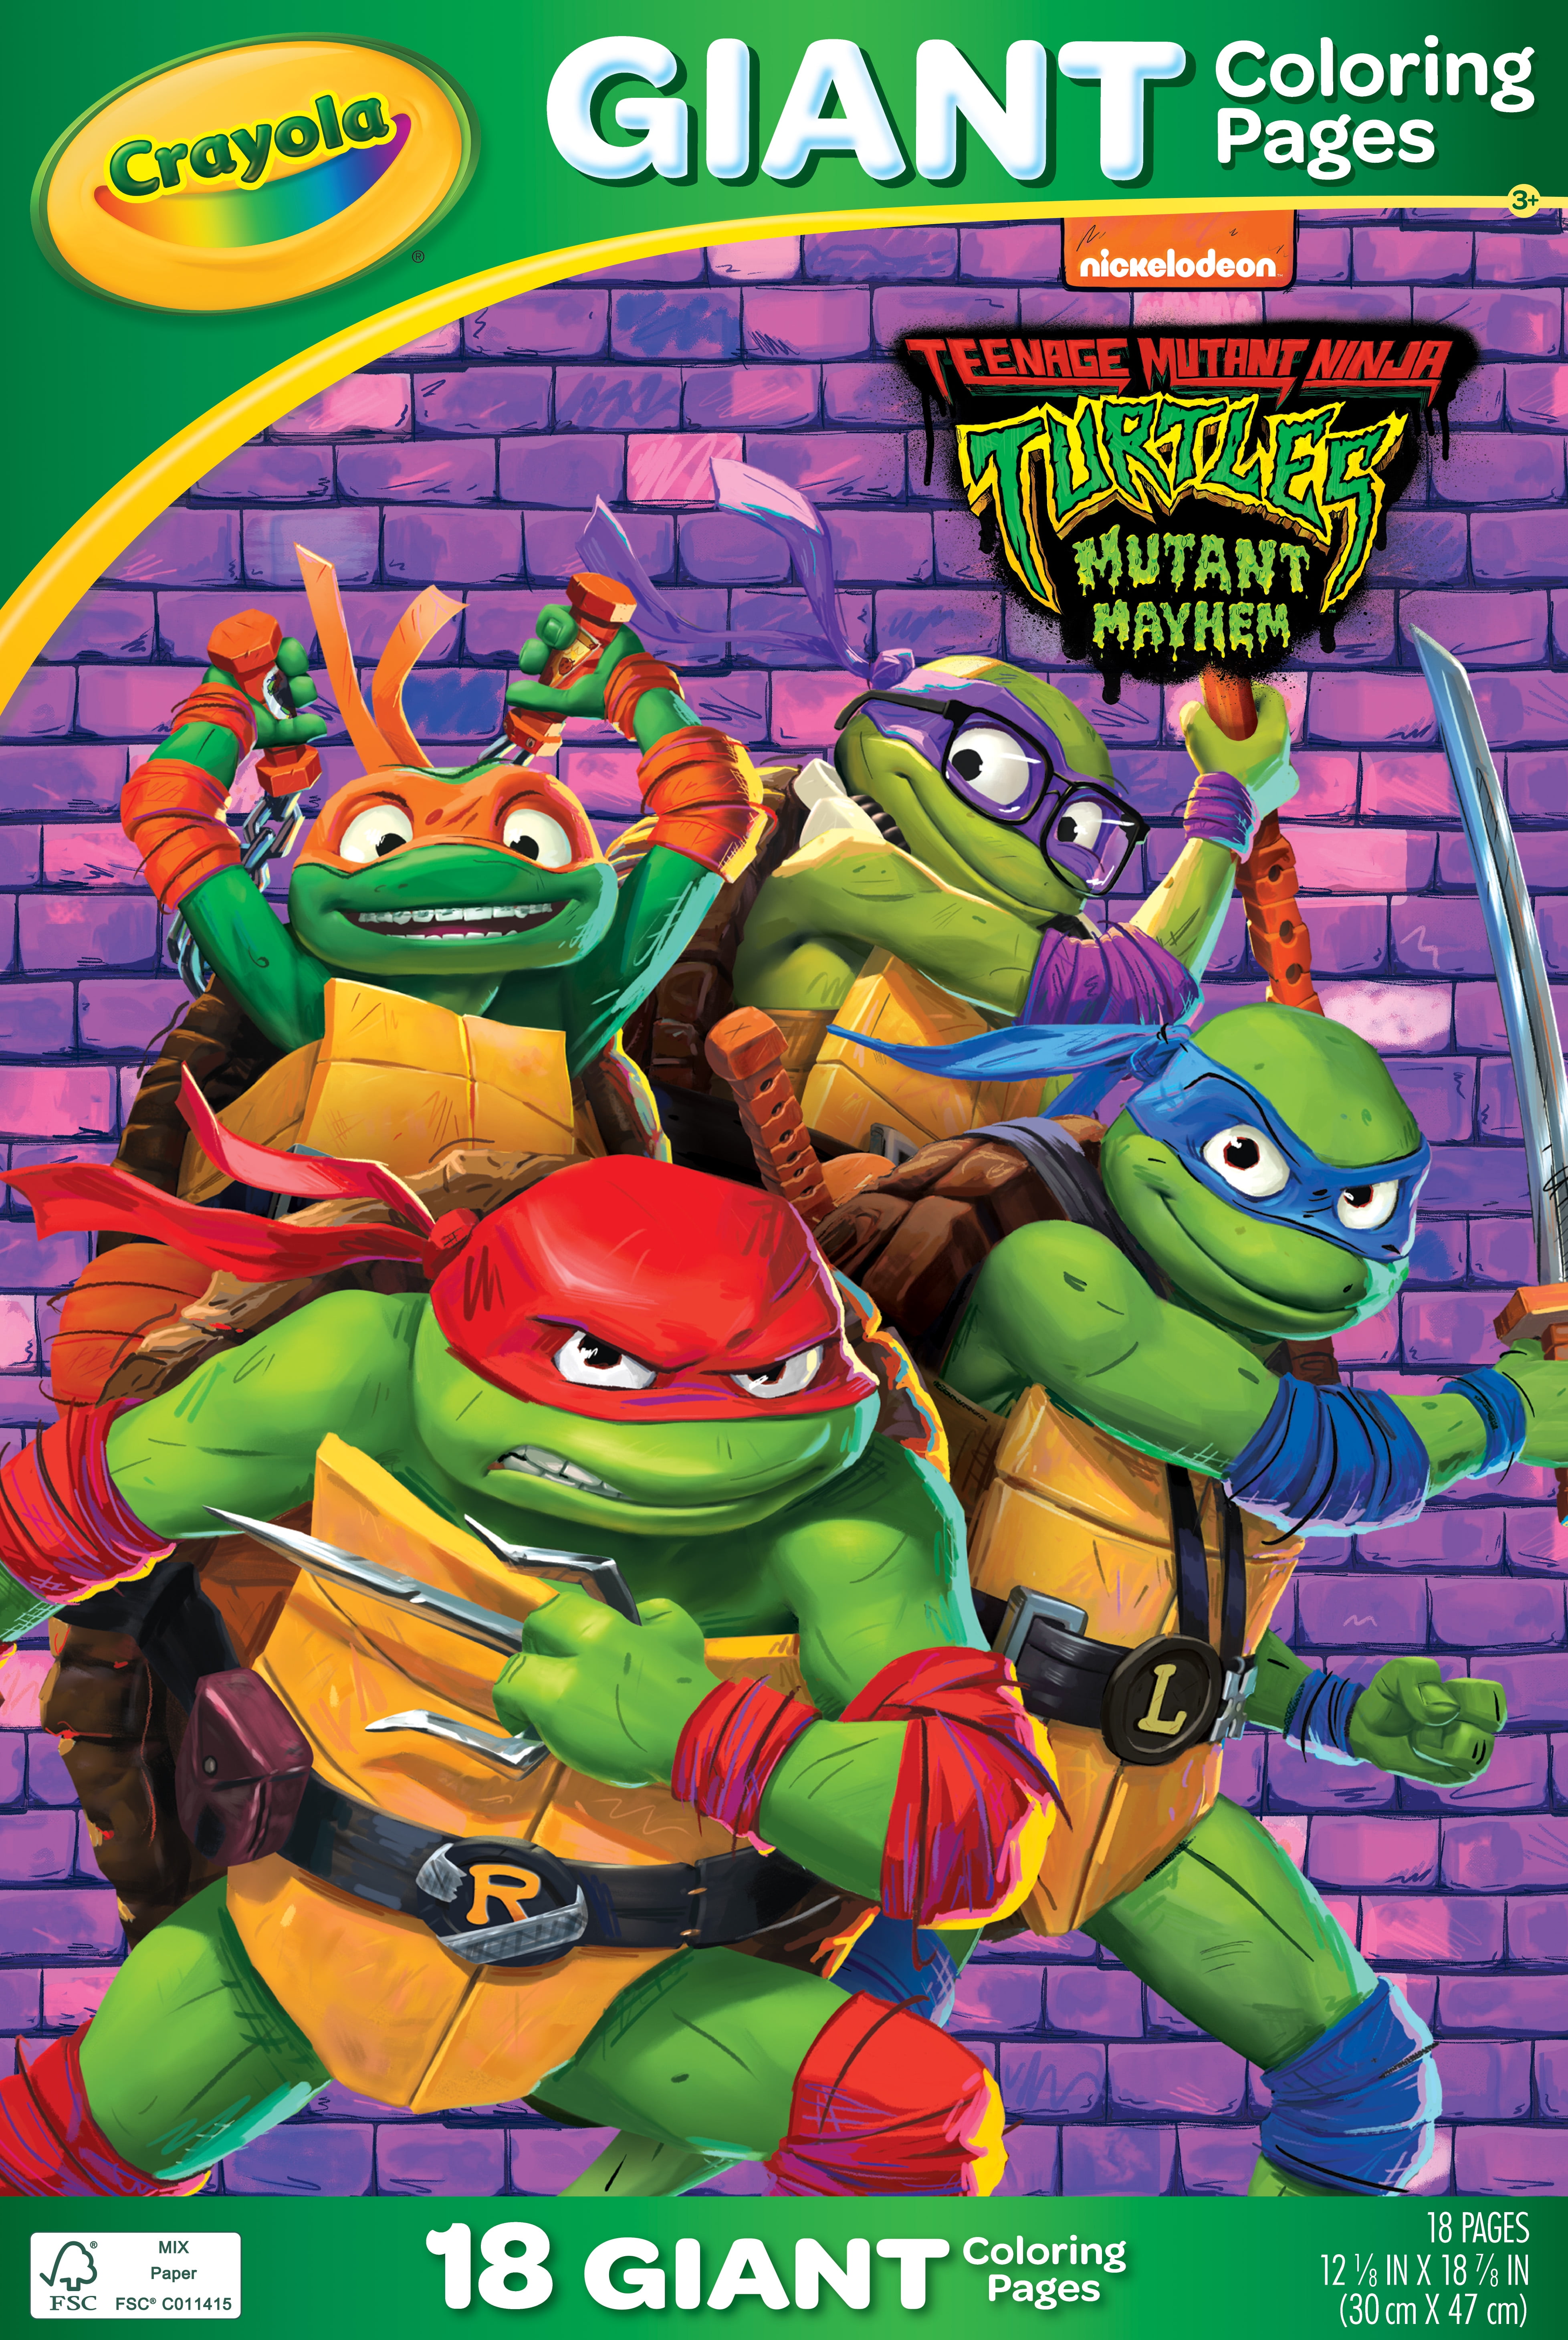 Crayola TMNT Movie Giant Coloring Pages - 04-2785